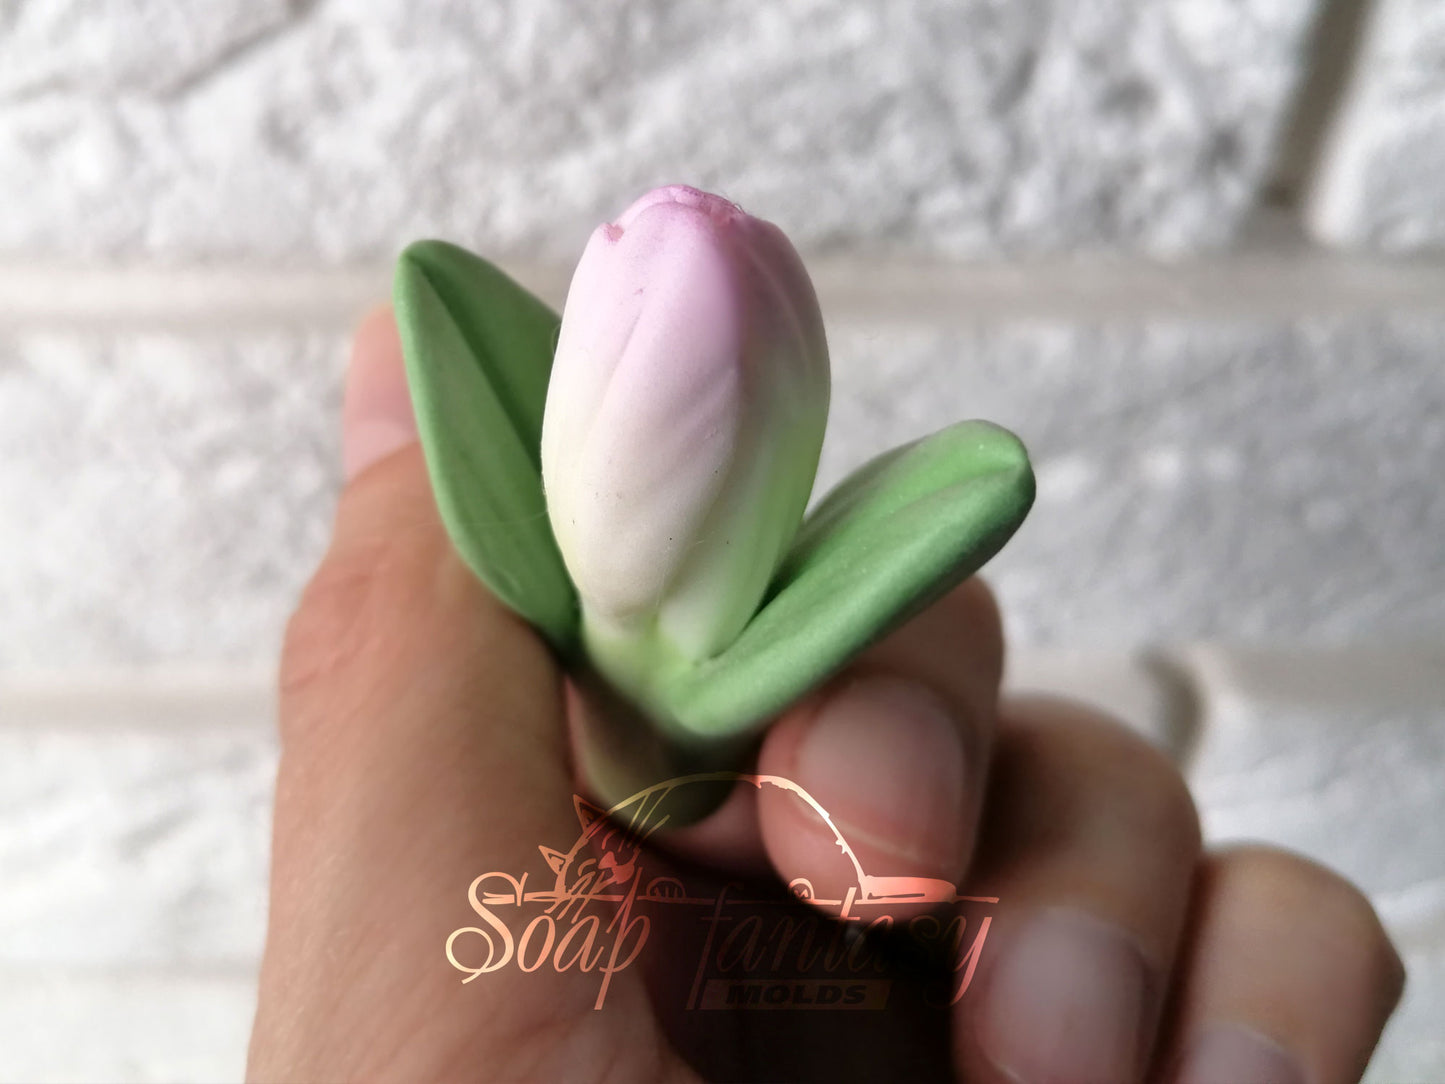 Alstroemeria lily bud with leaves silicone mold for soap making